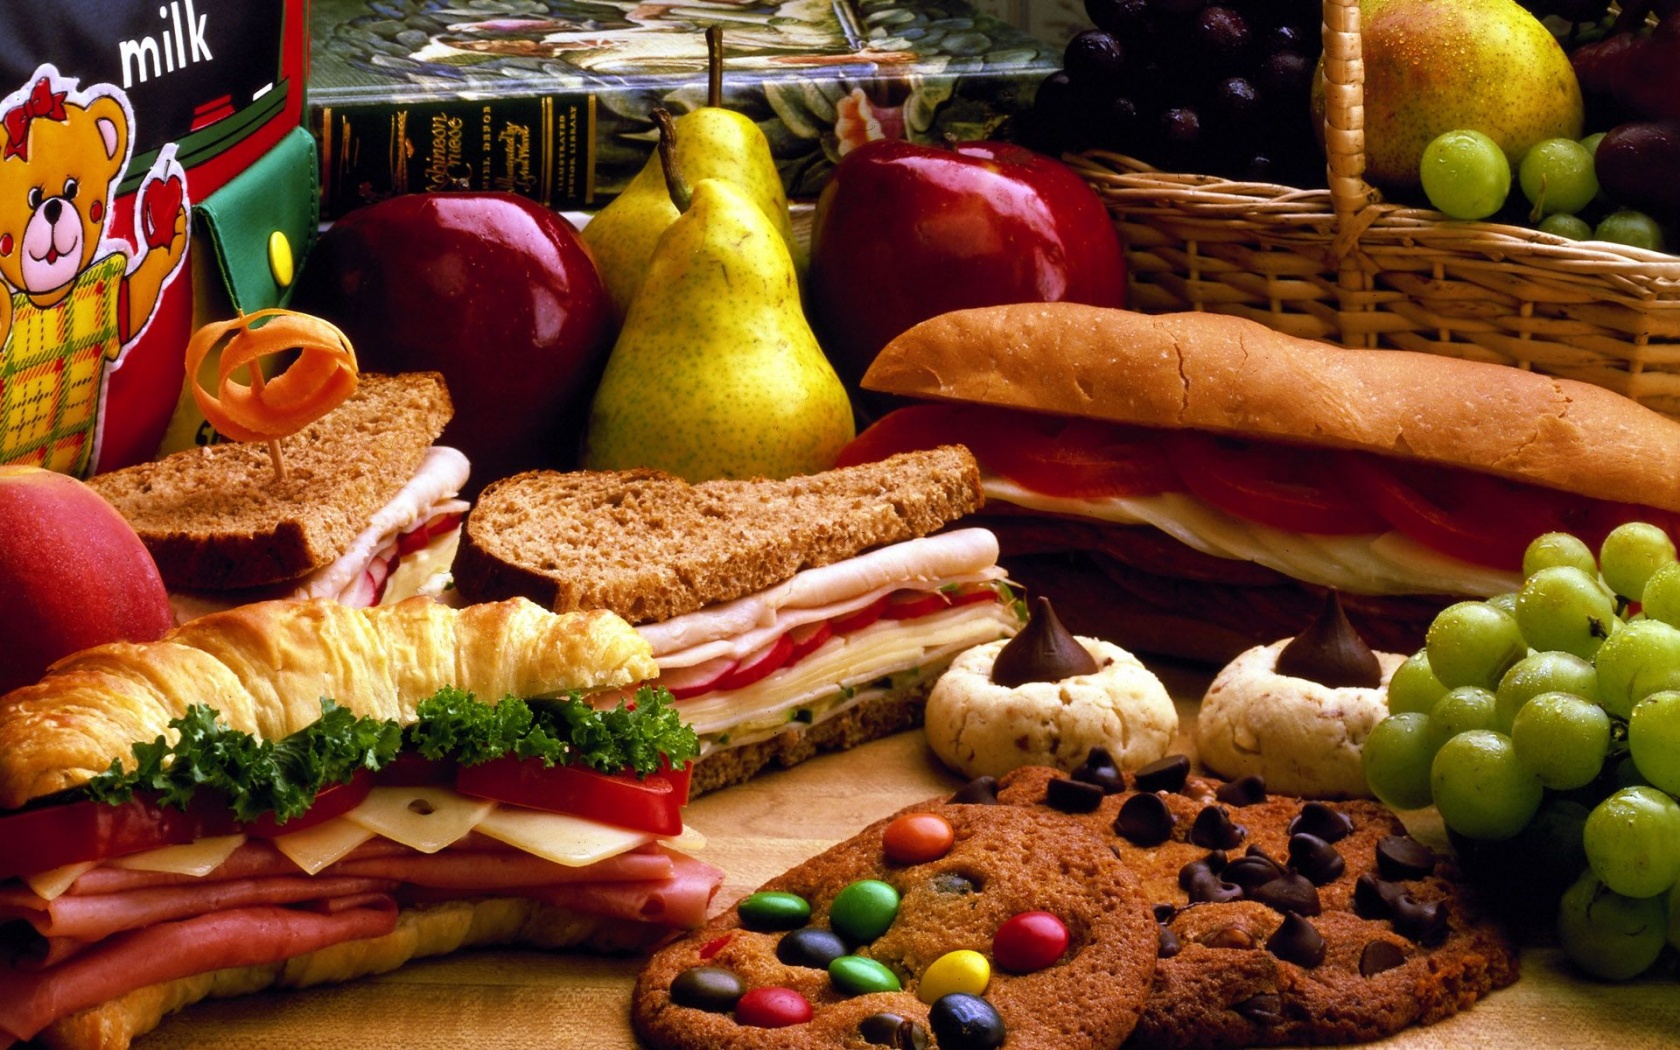 Sandwiches Cookies Bread Grapes Pears Apples